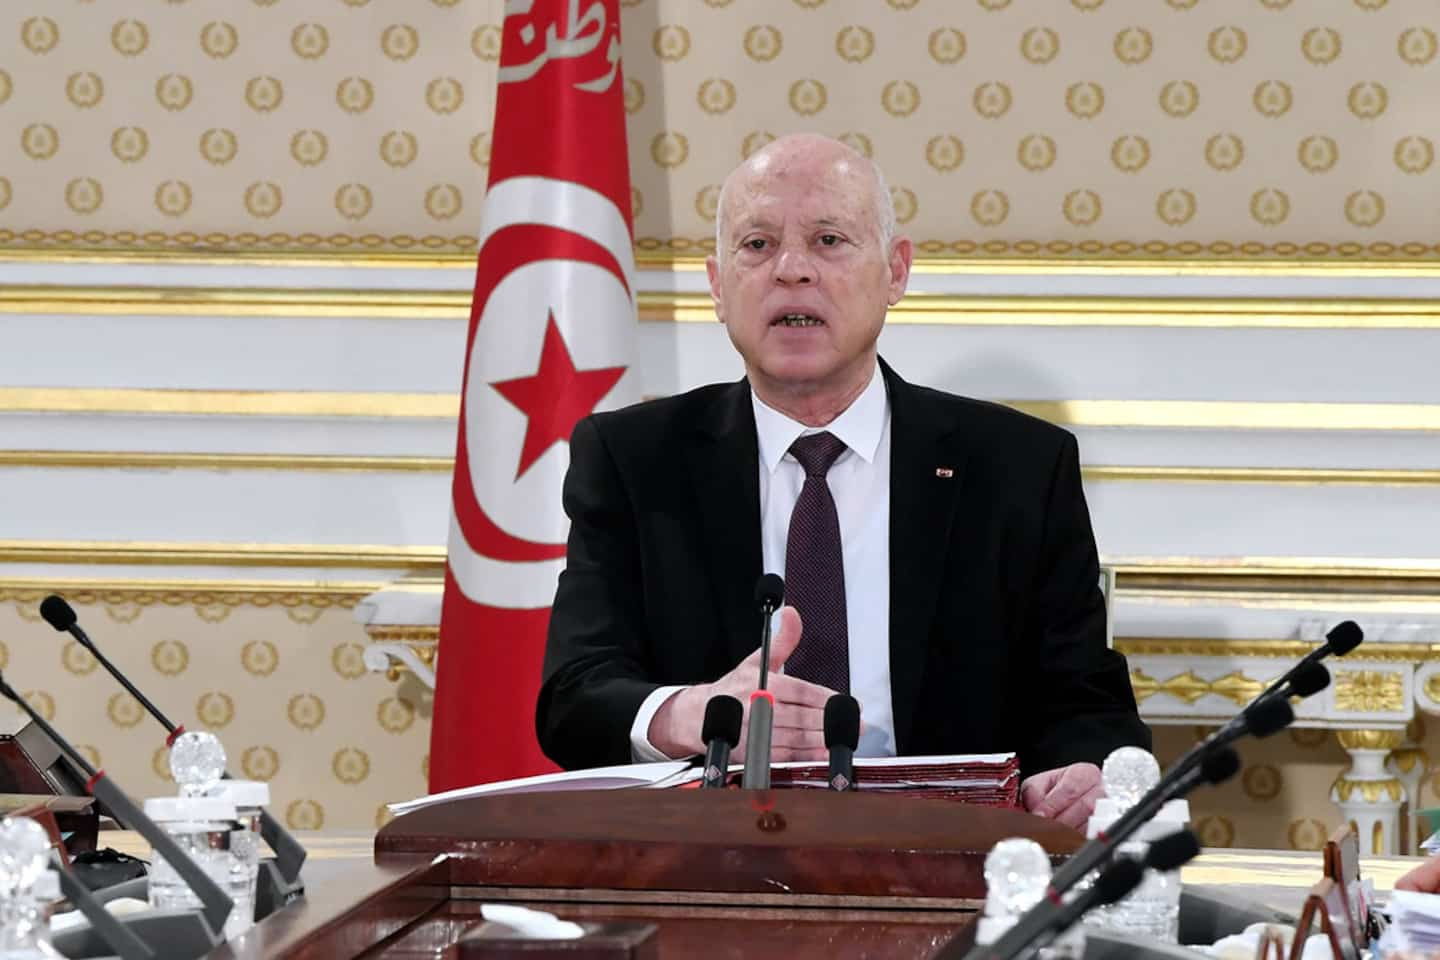 Tunisia: President Saied dismisses nearly 60 judges, further strengthens his powers